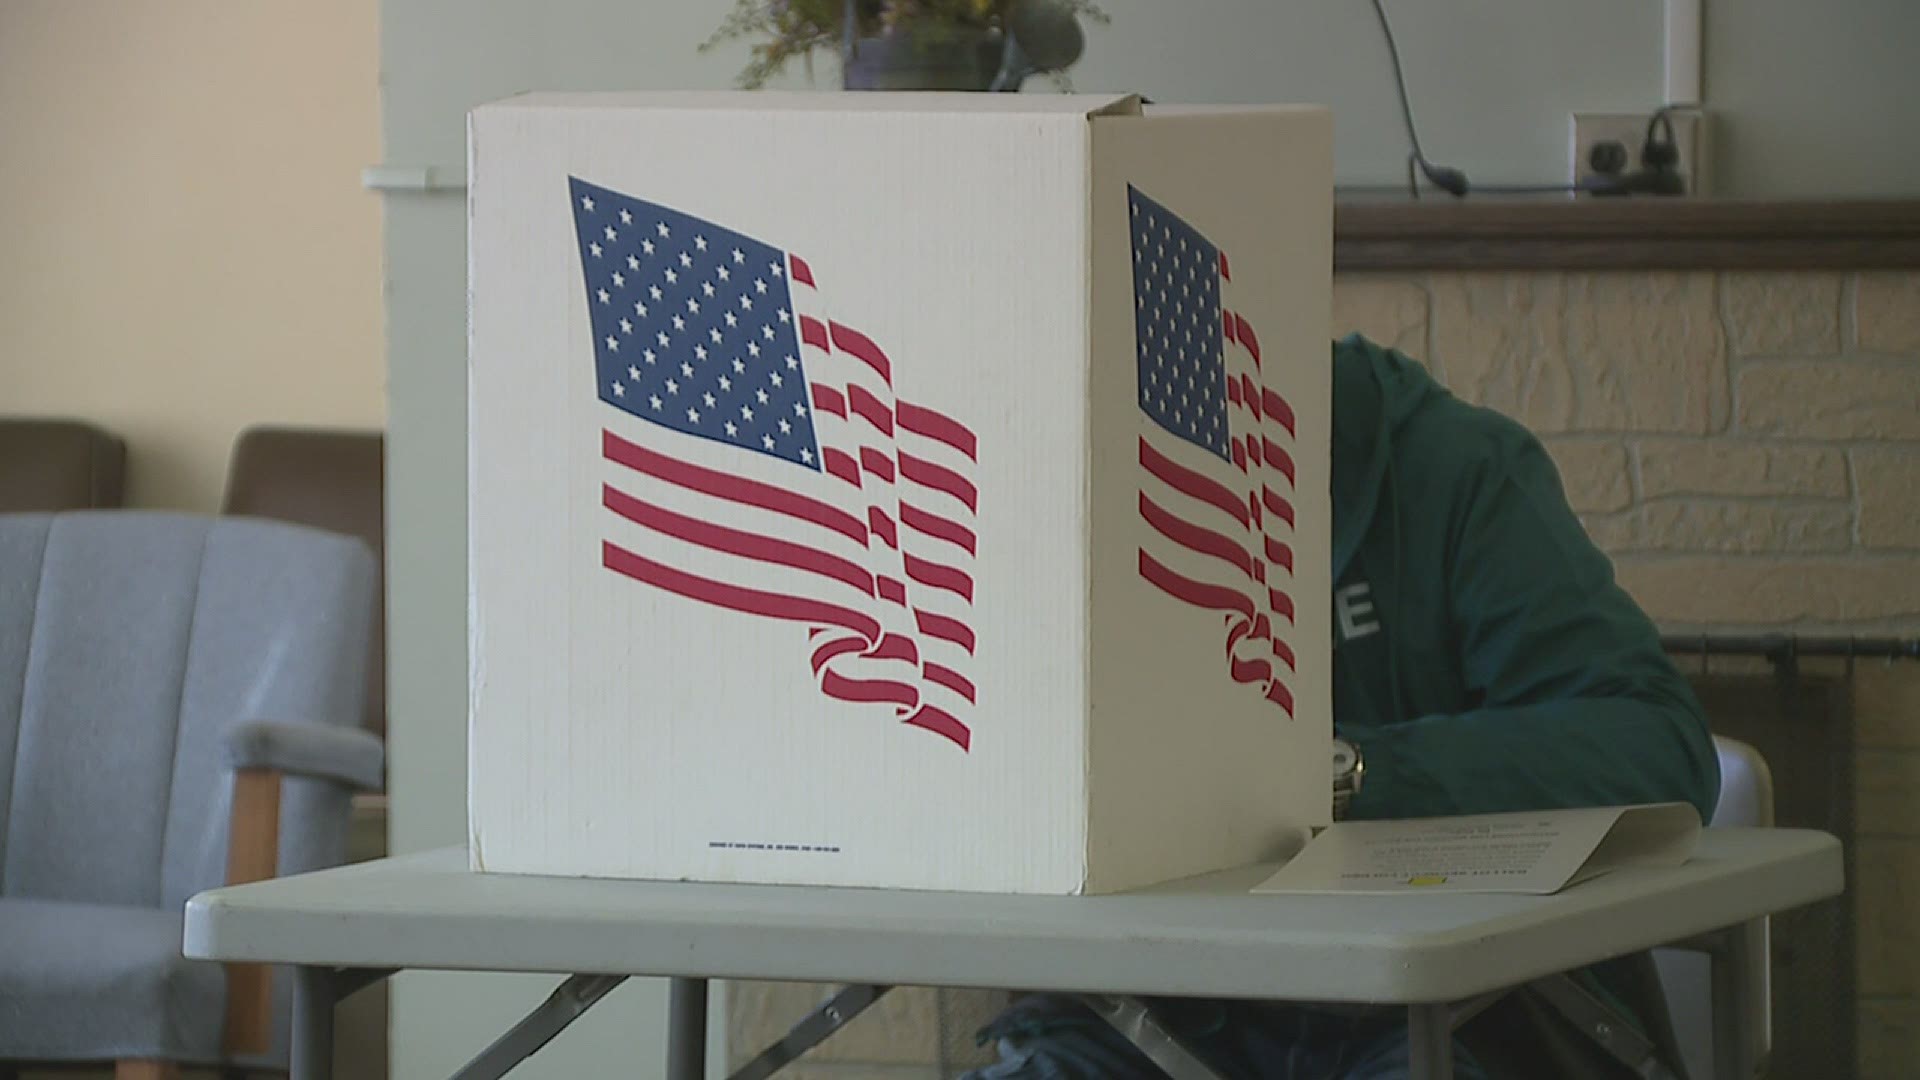 The bill would reduce the amount of days Iowans could early and absentee vote, as well as make it more difficult for counties to set up satellite voting lcoations.